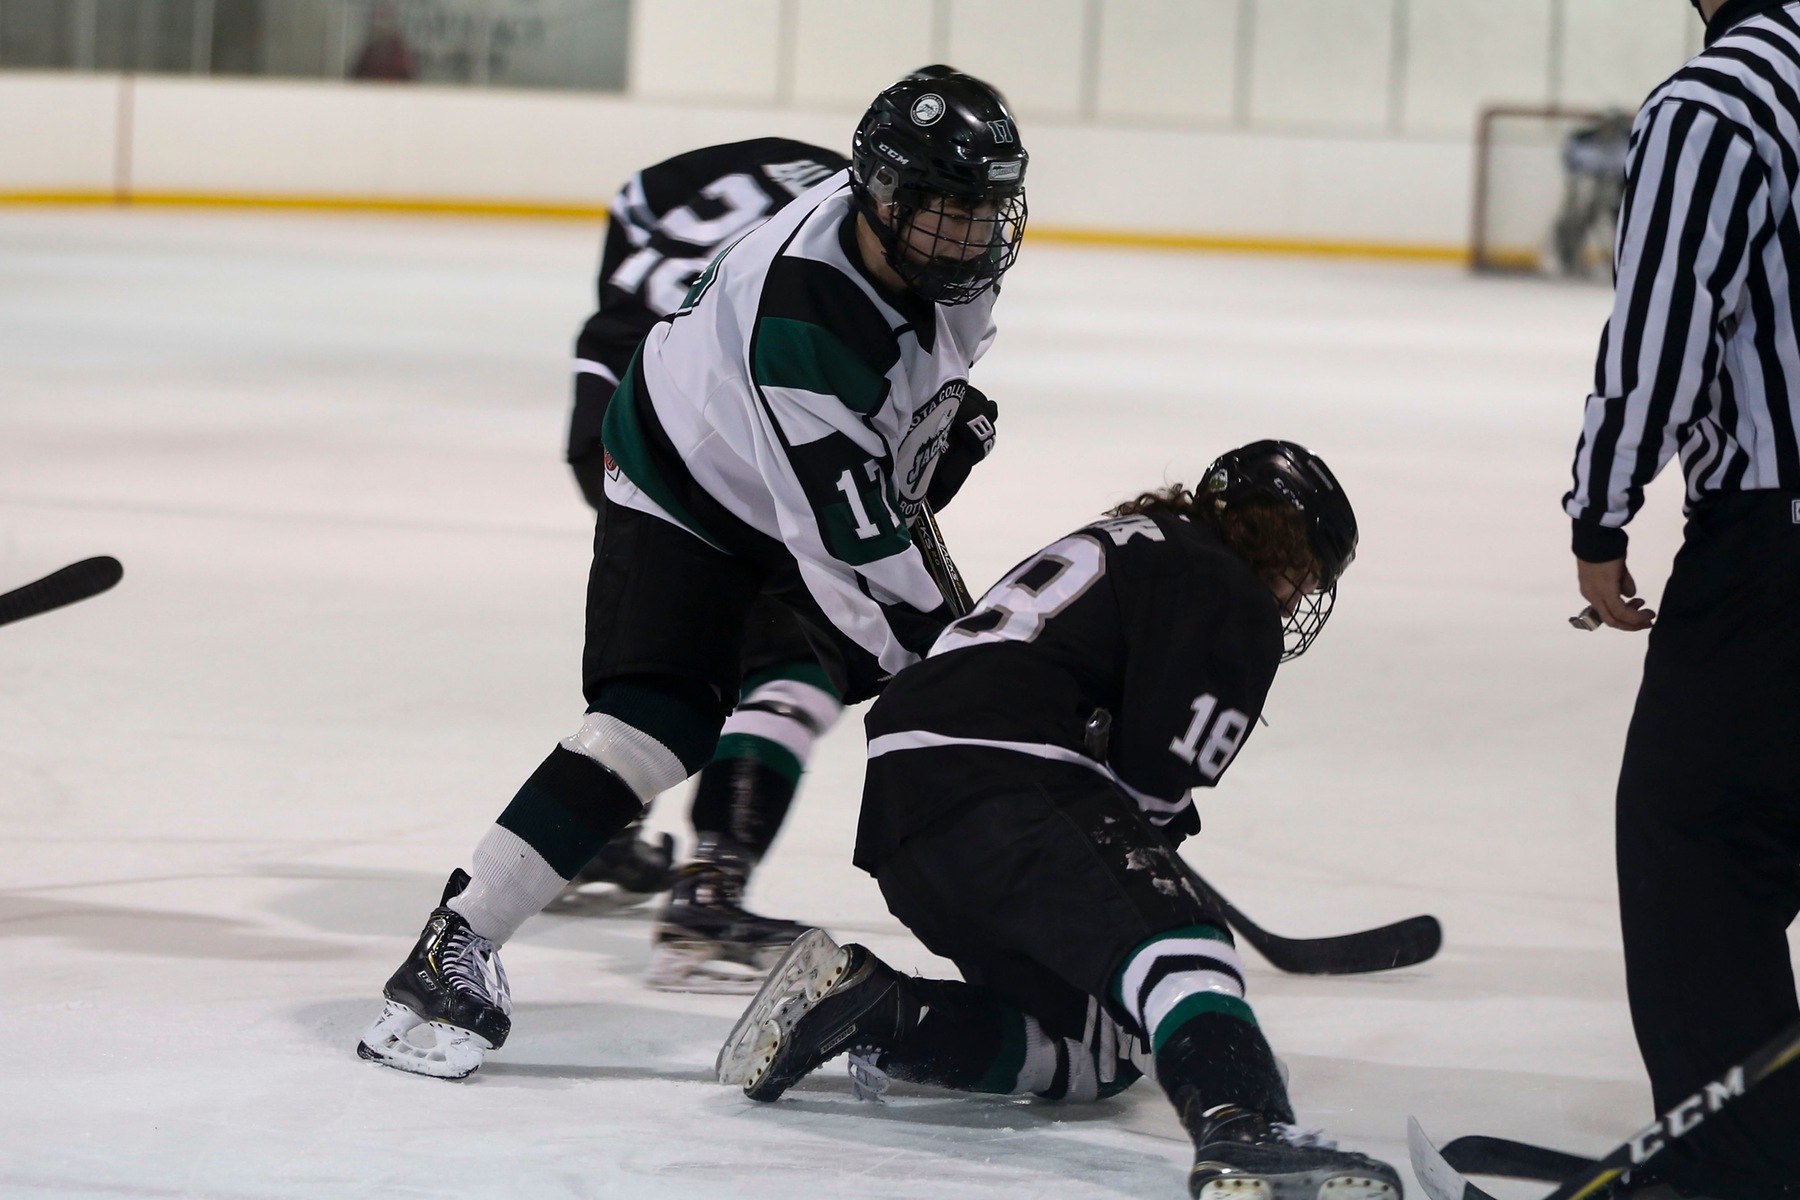 Kyle peters picked up 2 goals and 1 assist against the University of Providence Monday January 7th at the Lumberdome.